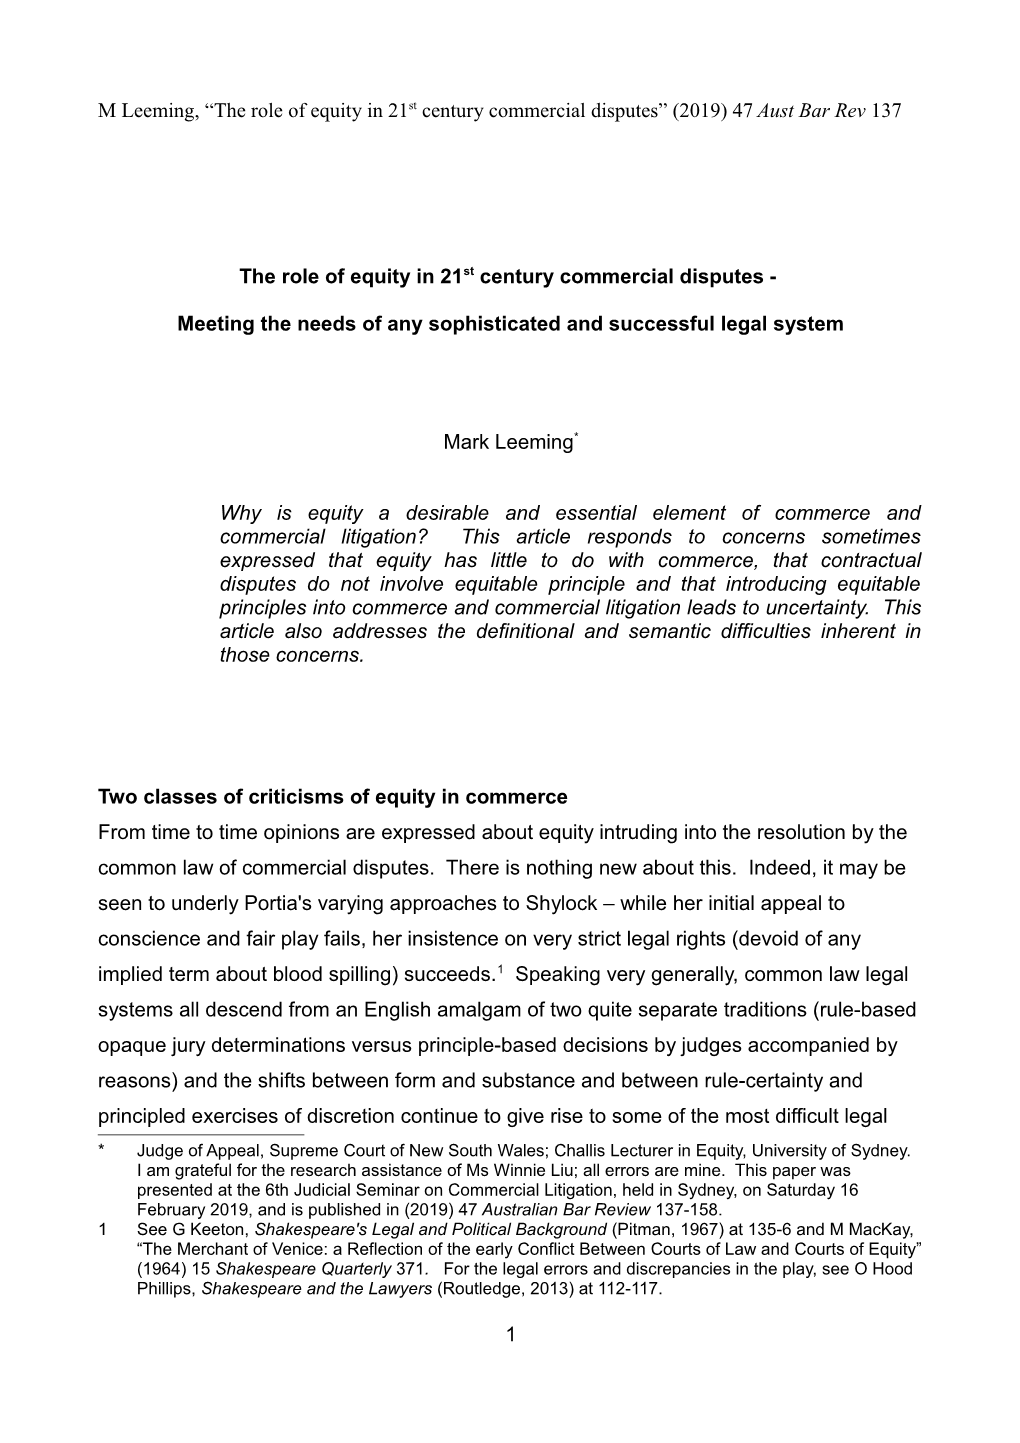 M Leeming, “The Role of Equity in 21St Century Commercial Disputes” (2019) 47 Aust Bar Rev 137